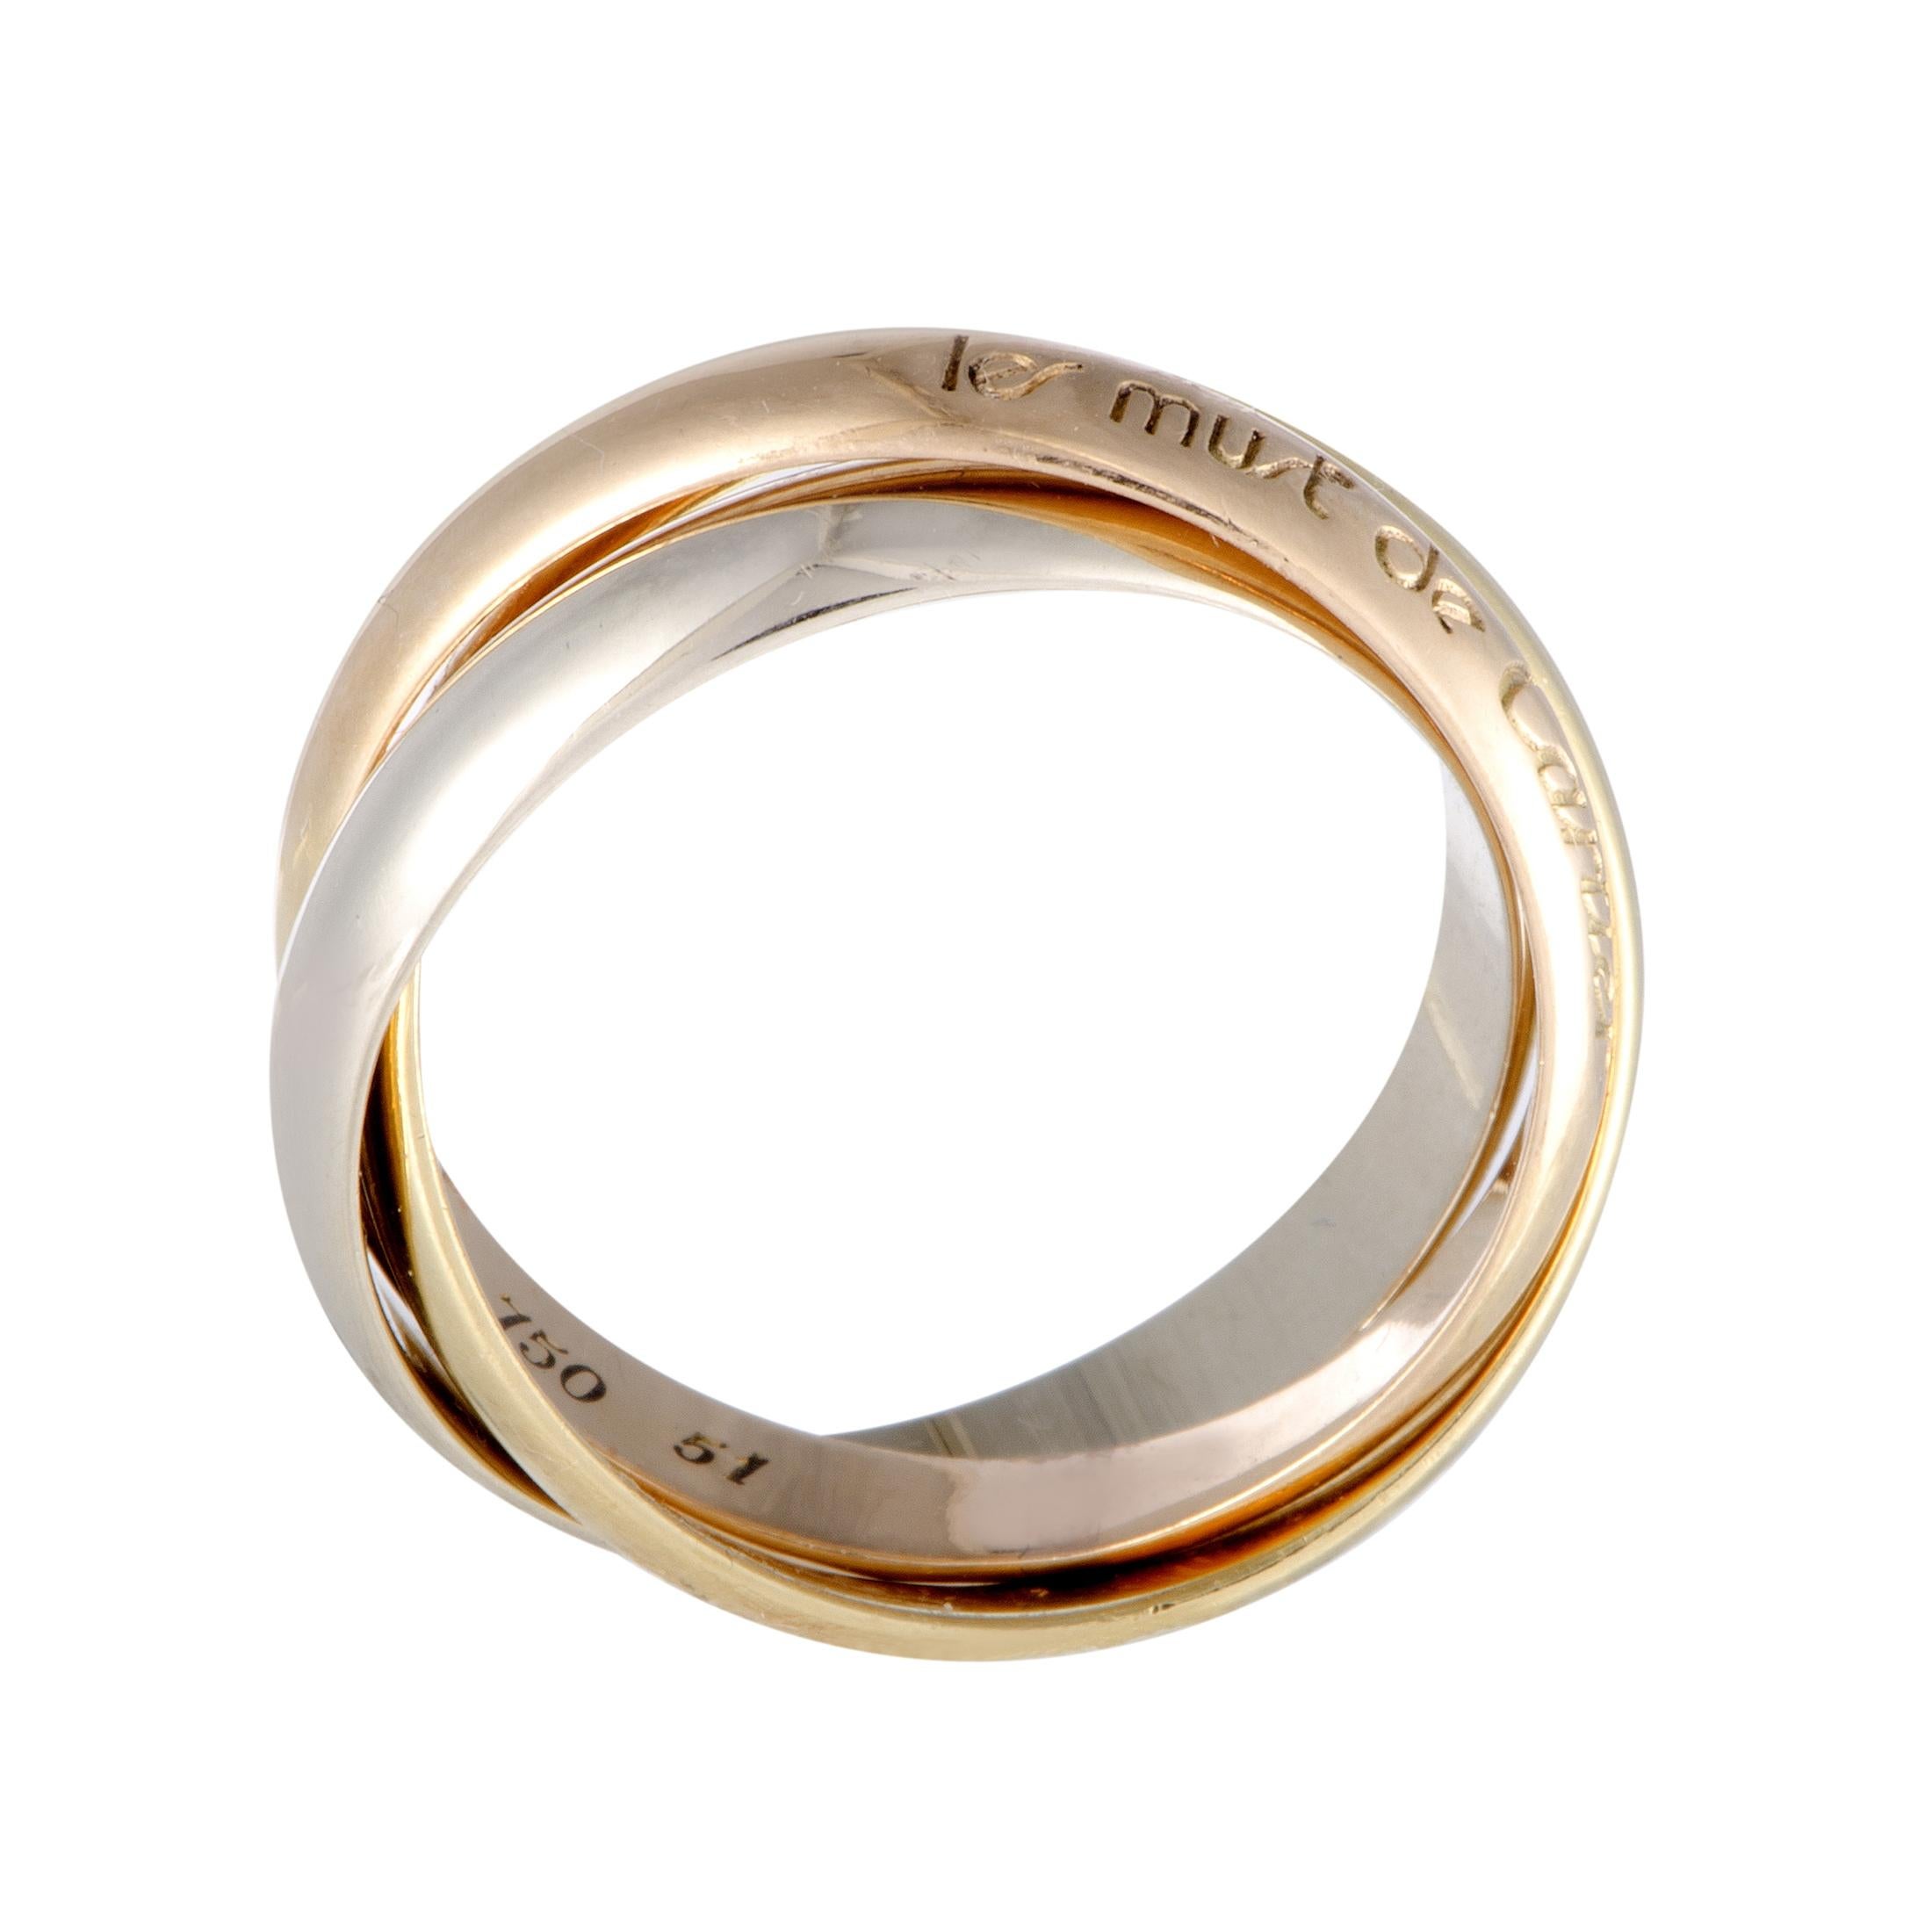 A classic piece from the renowned French jewelry maker, this Cartier Trinity ring compels with its timelessly elegant allure. It is comprised of three bands, each made of 18K yellow, white and rose gold.